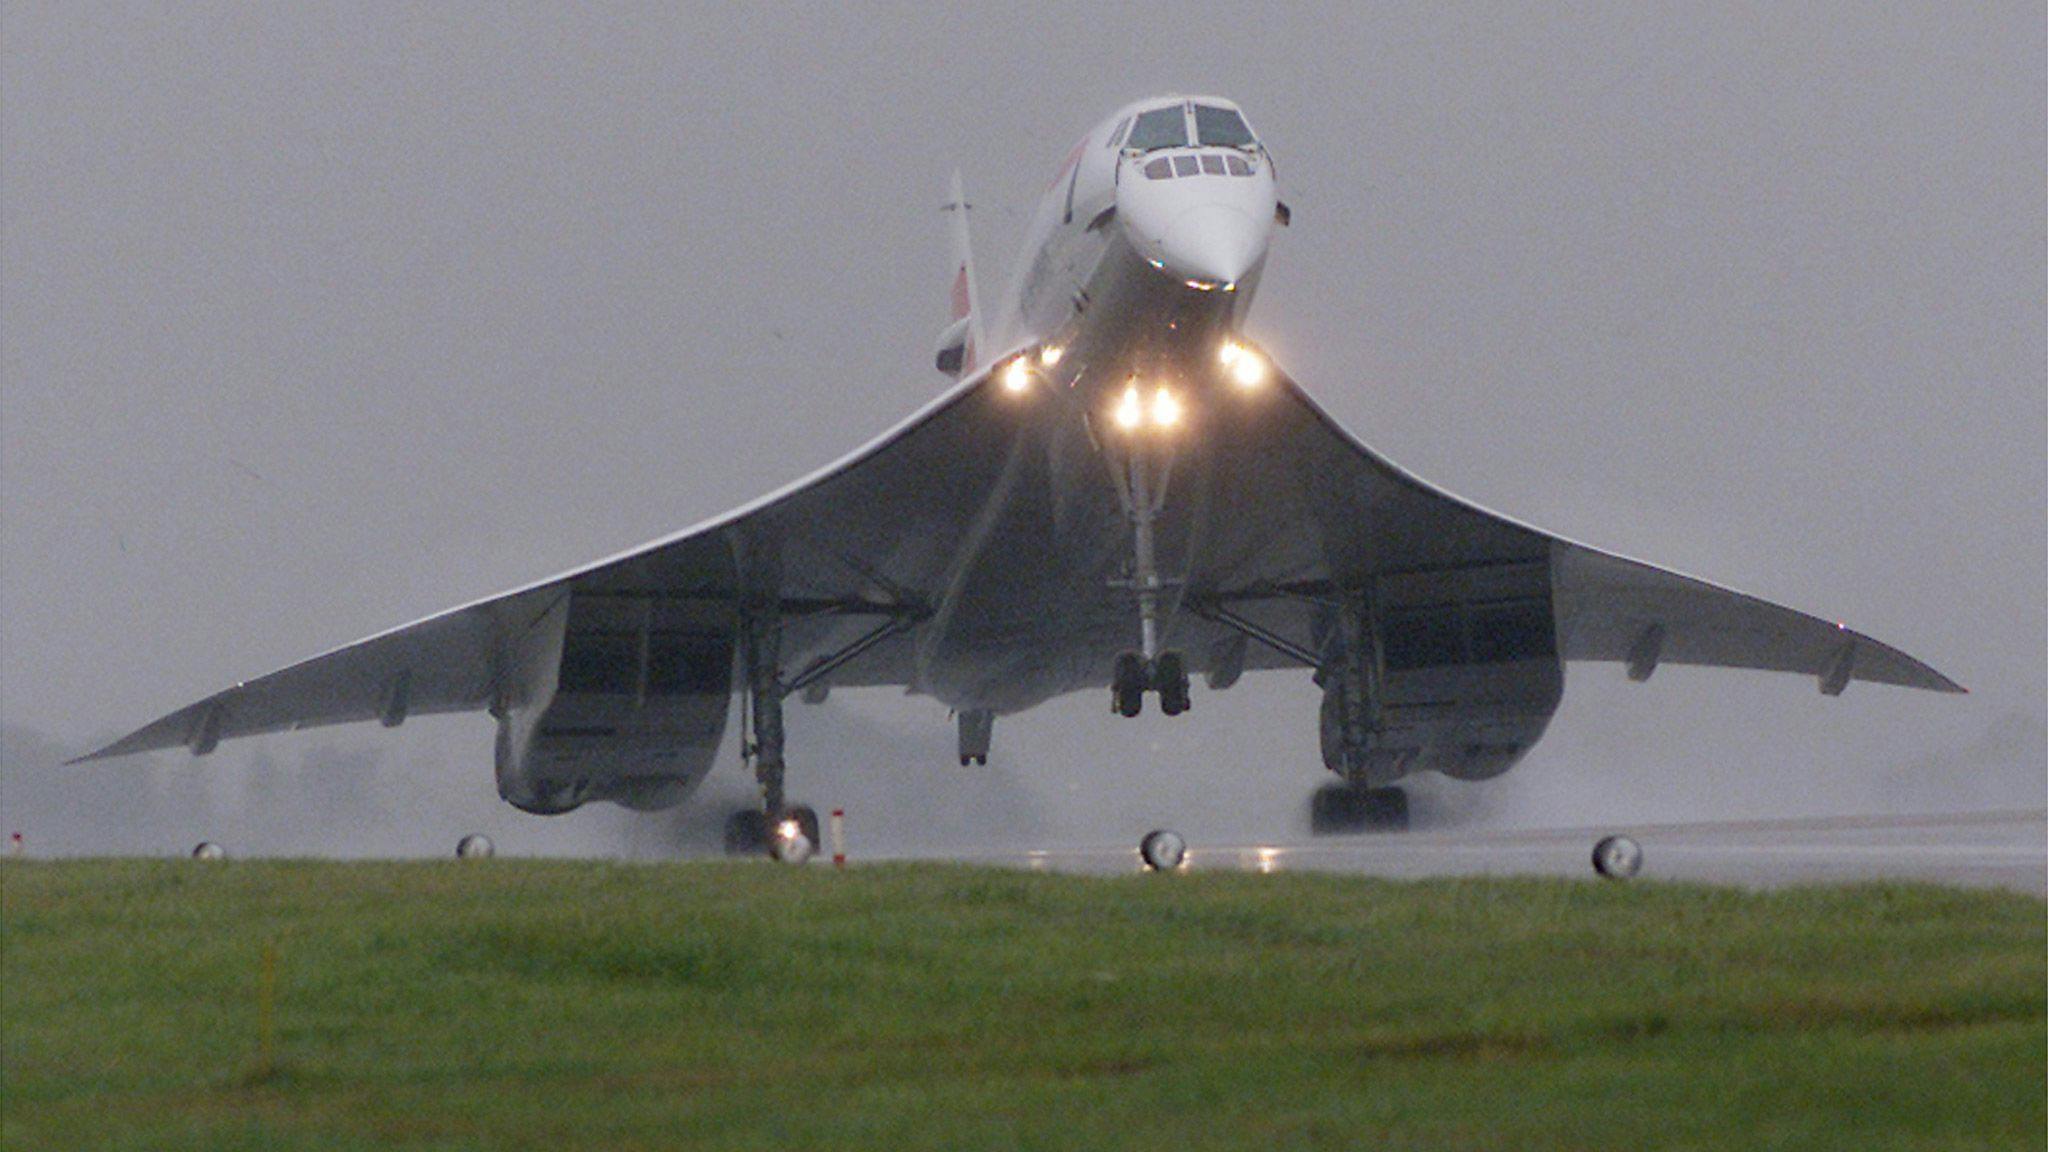 Why the Concorde Could Move its Nose    